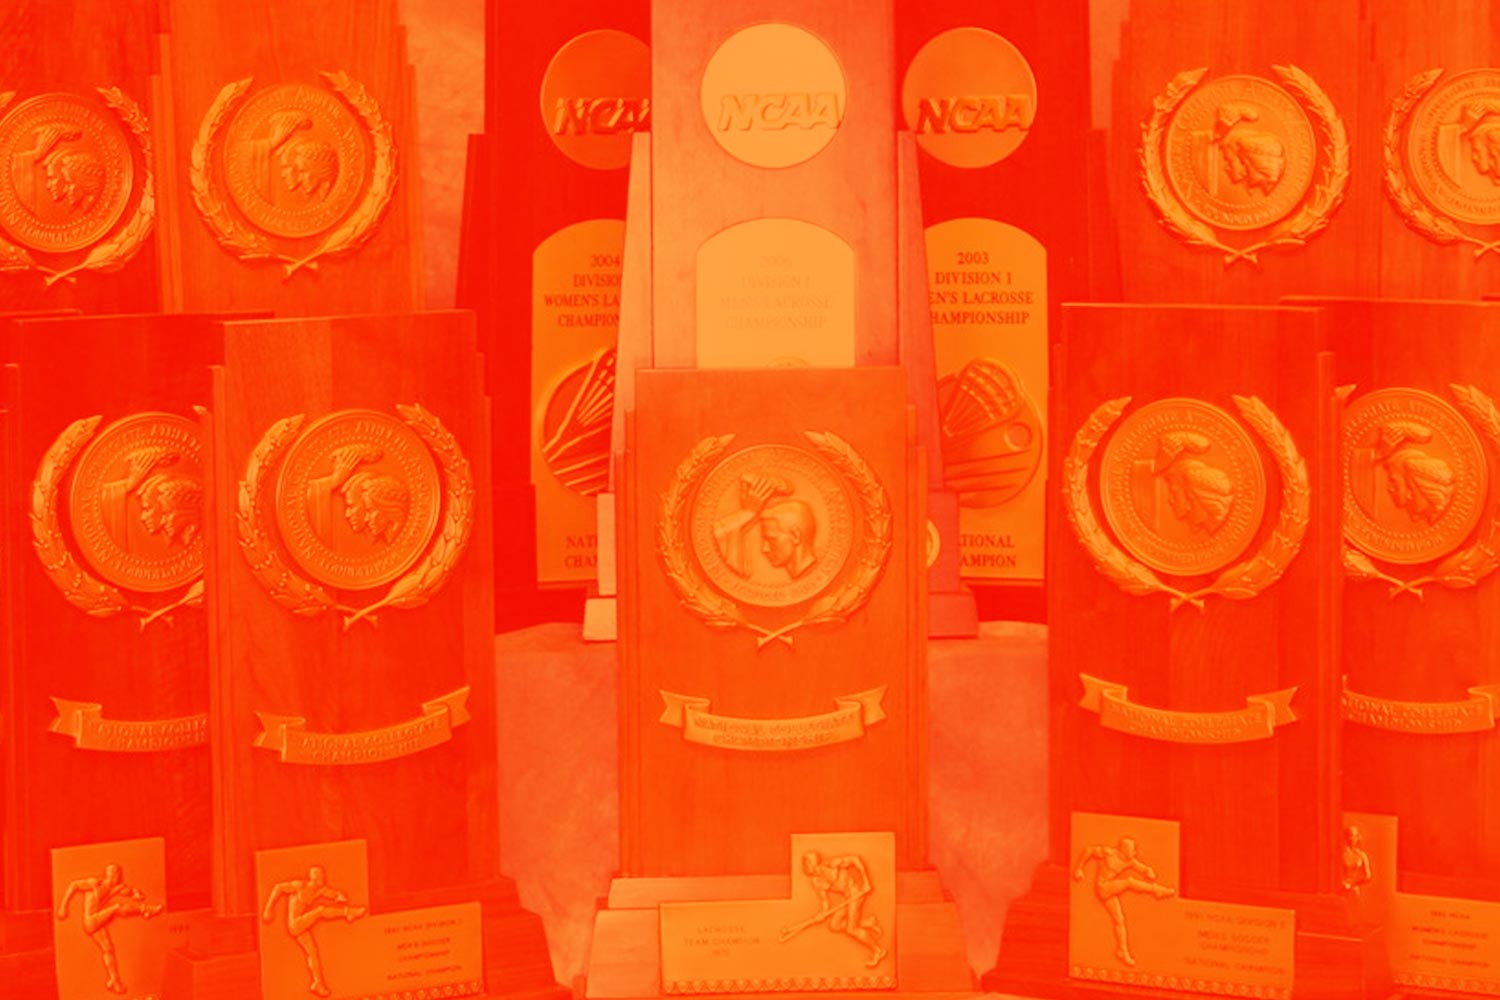 NCAA trophies graphic with an orange overlay